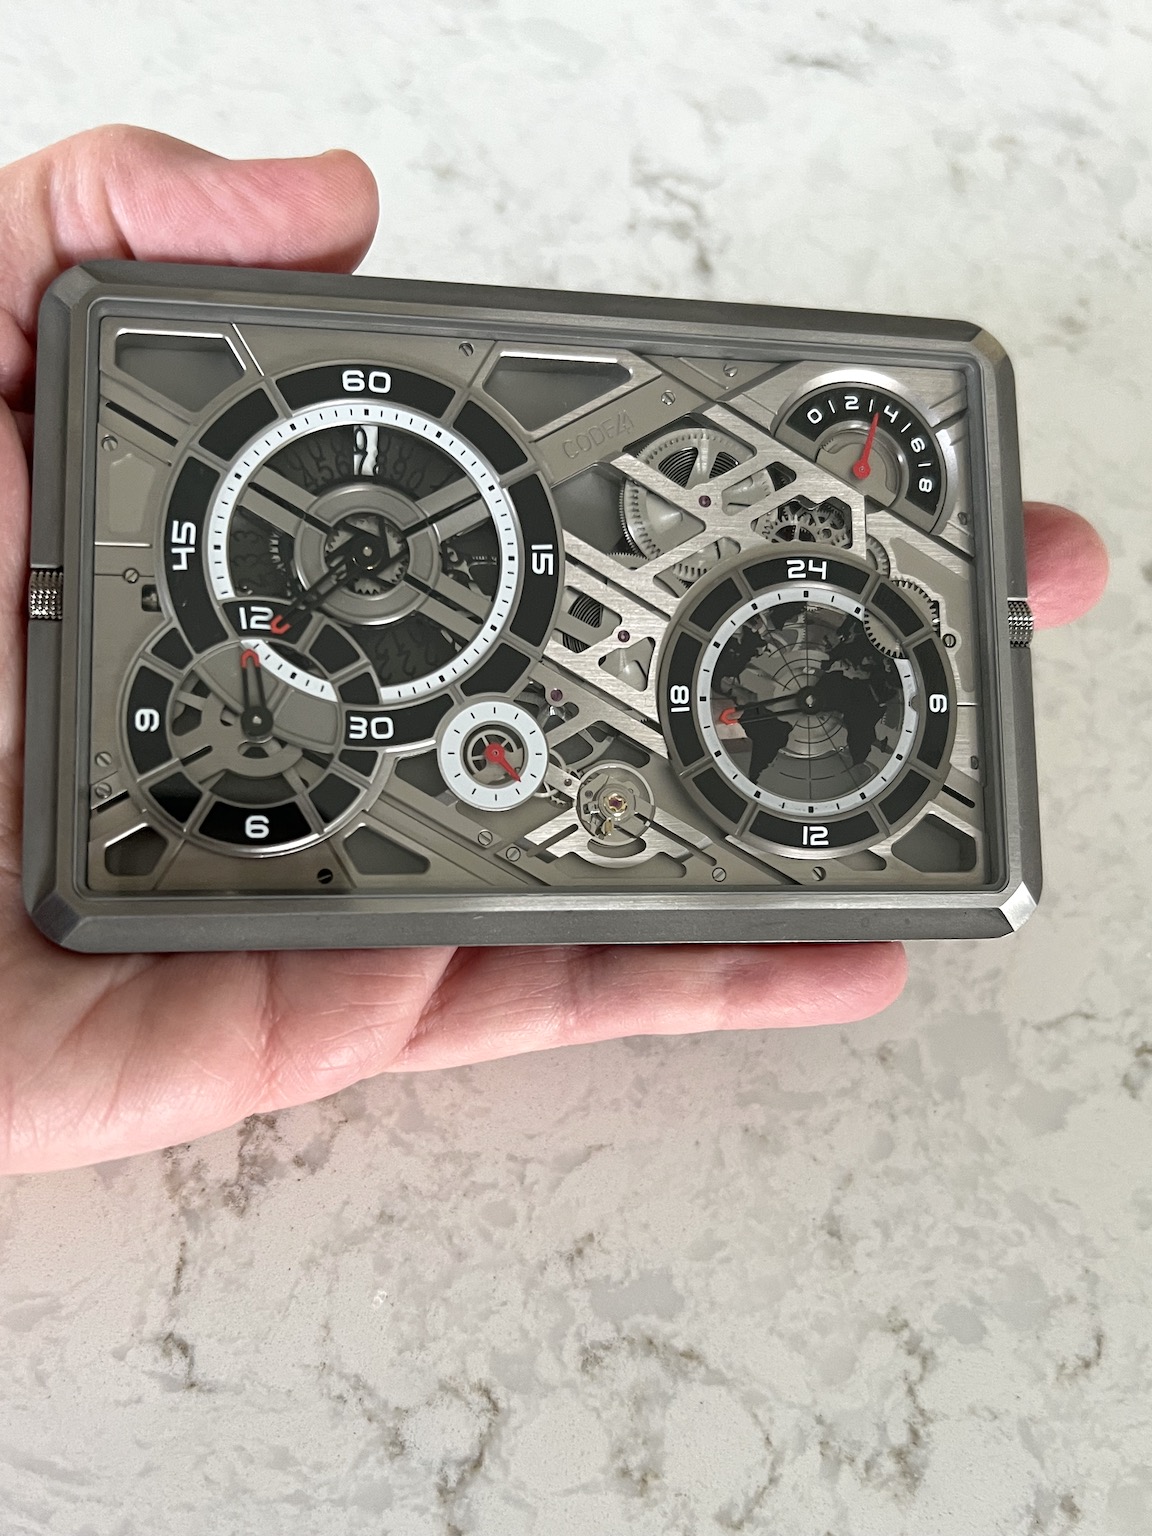 Code41 Introduces the Mecascape Pocket Watch